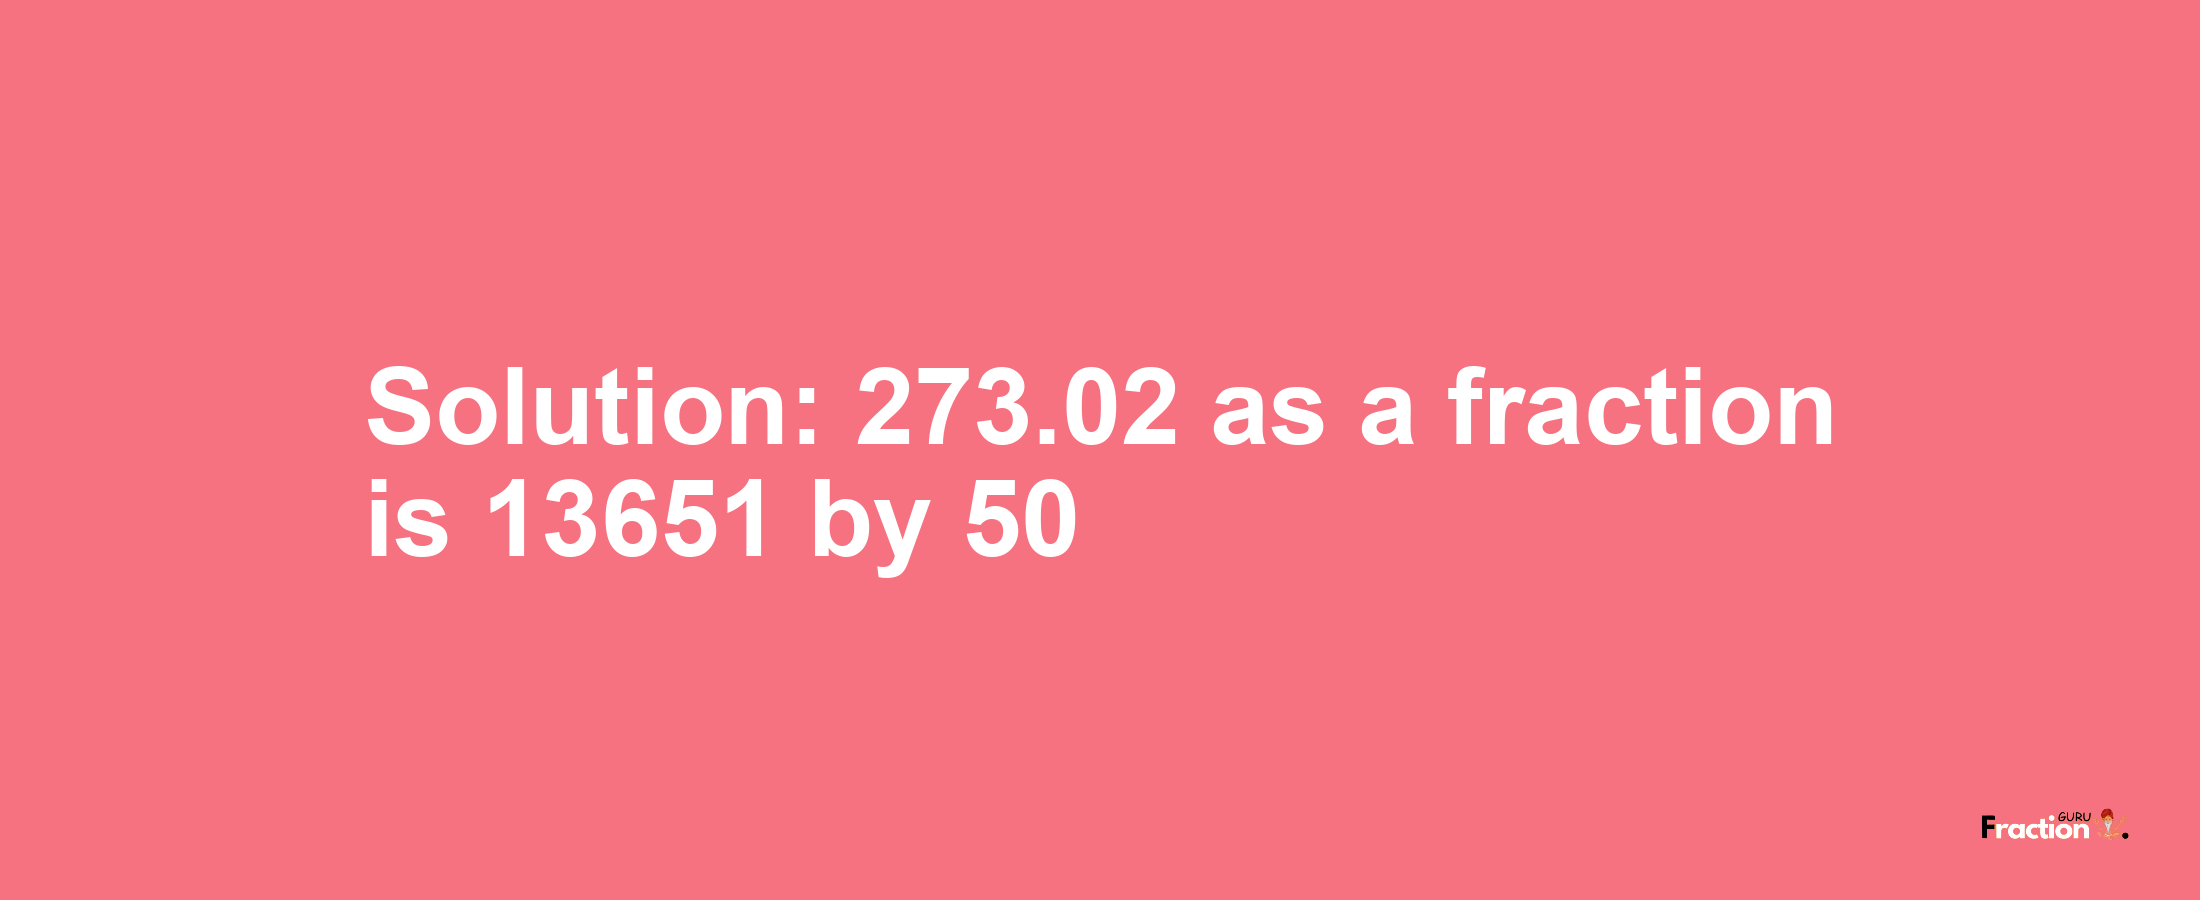 Solution:273.02 as a fraction is 13651/50